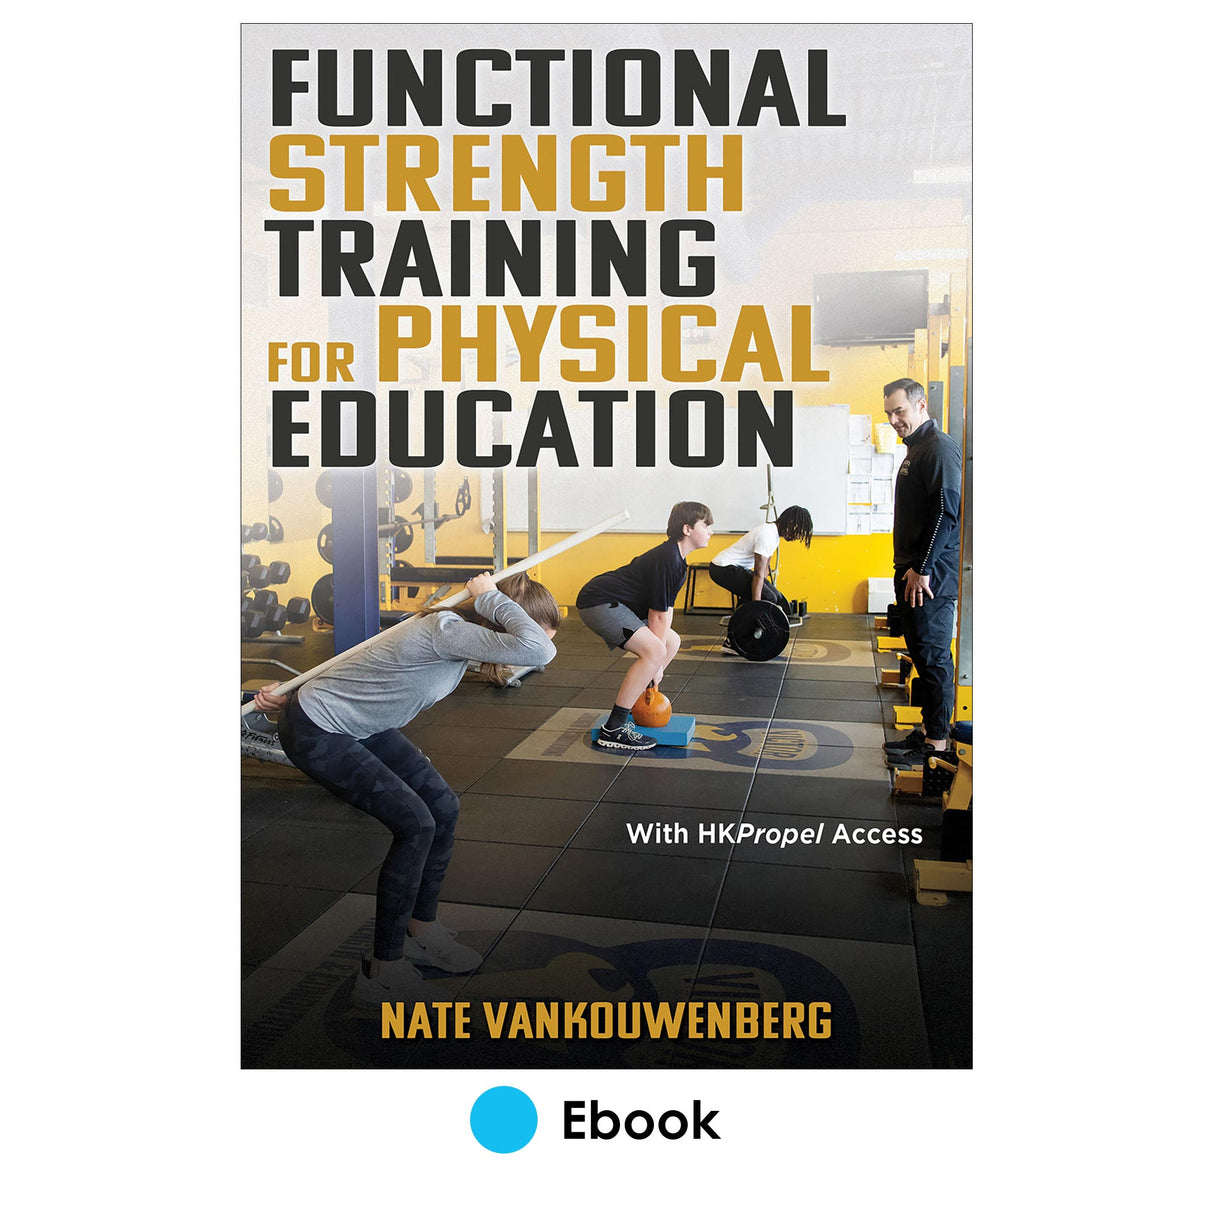 Functional Strength Training for Physical Education Ebook with HKPropel Access